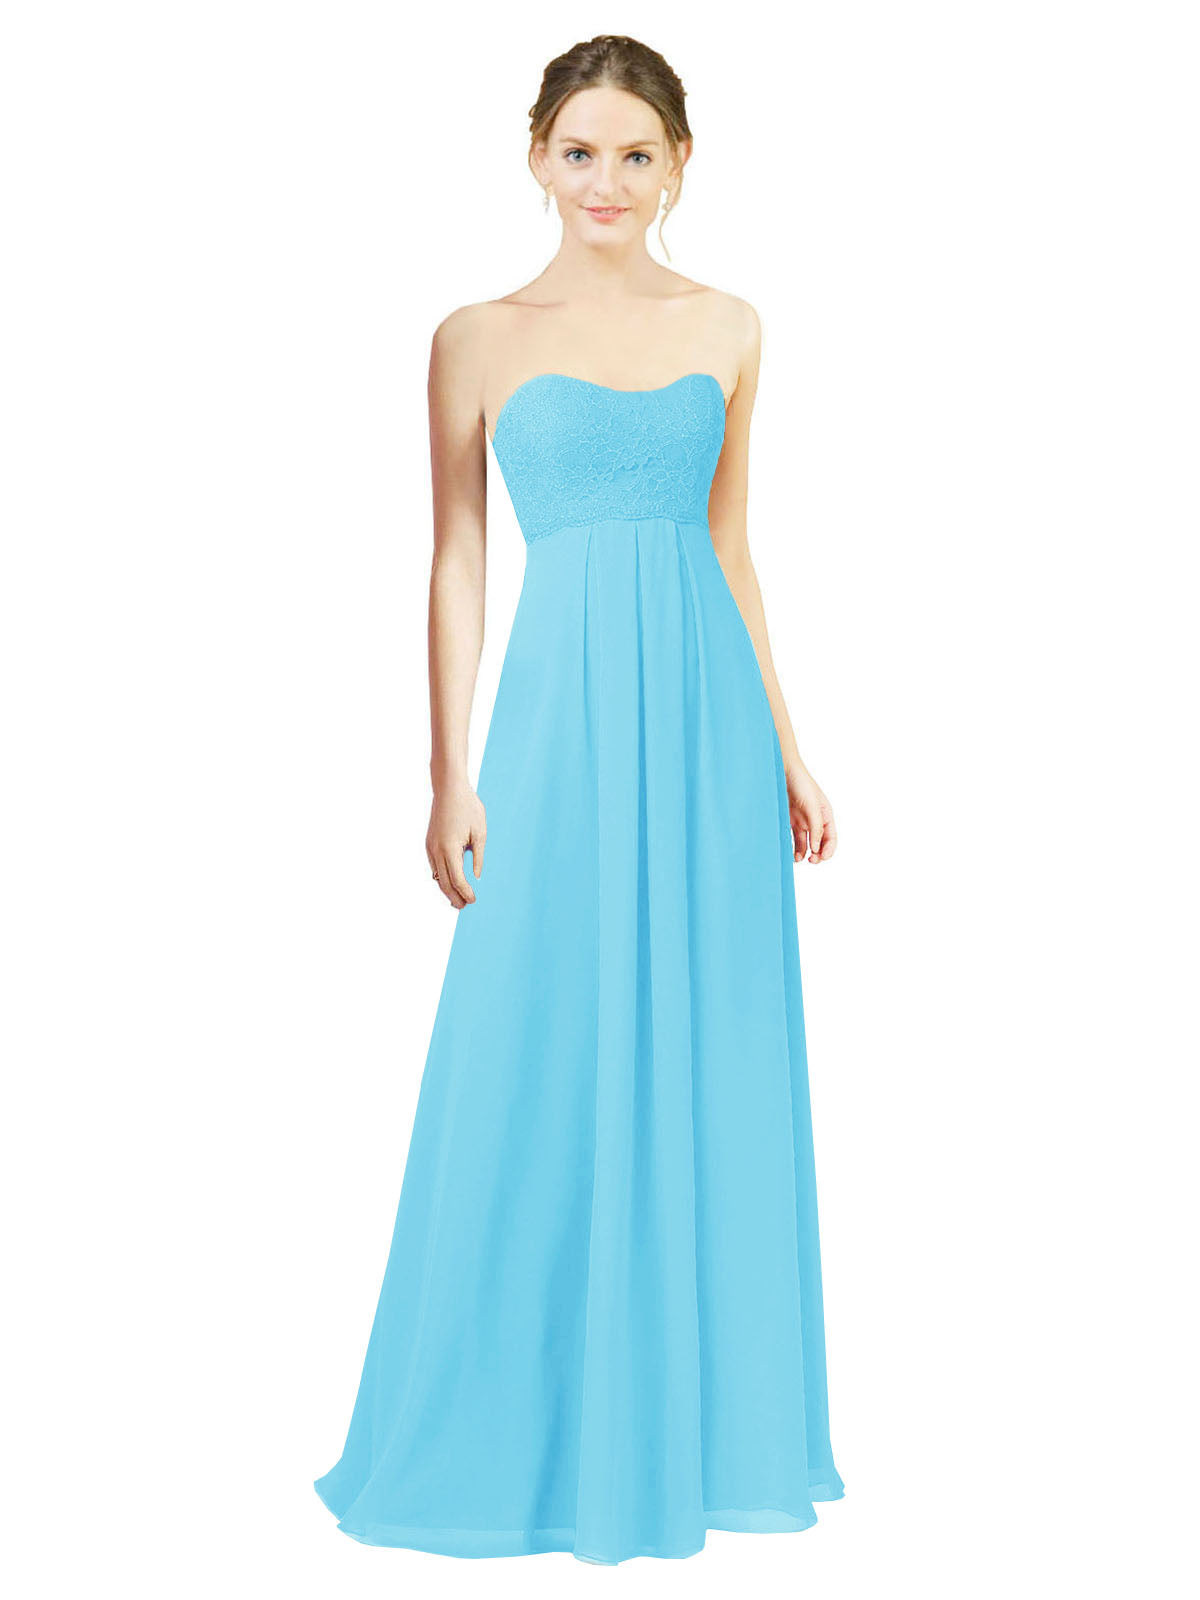 Sky Blue A-Line Sweetheart Strapless Long Bridesmaid Dress Melany